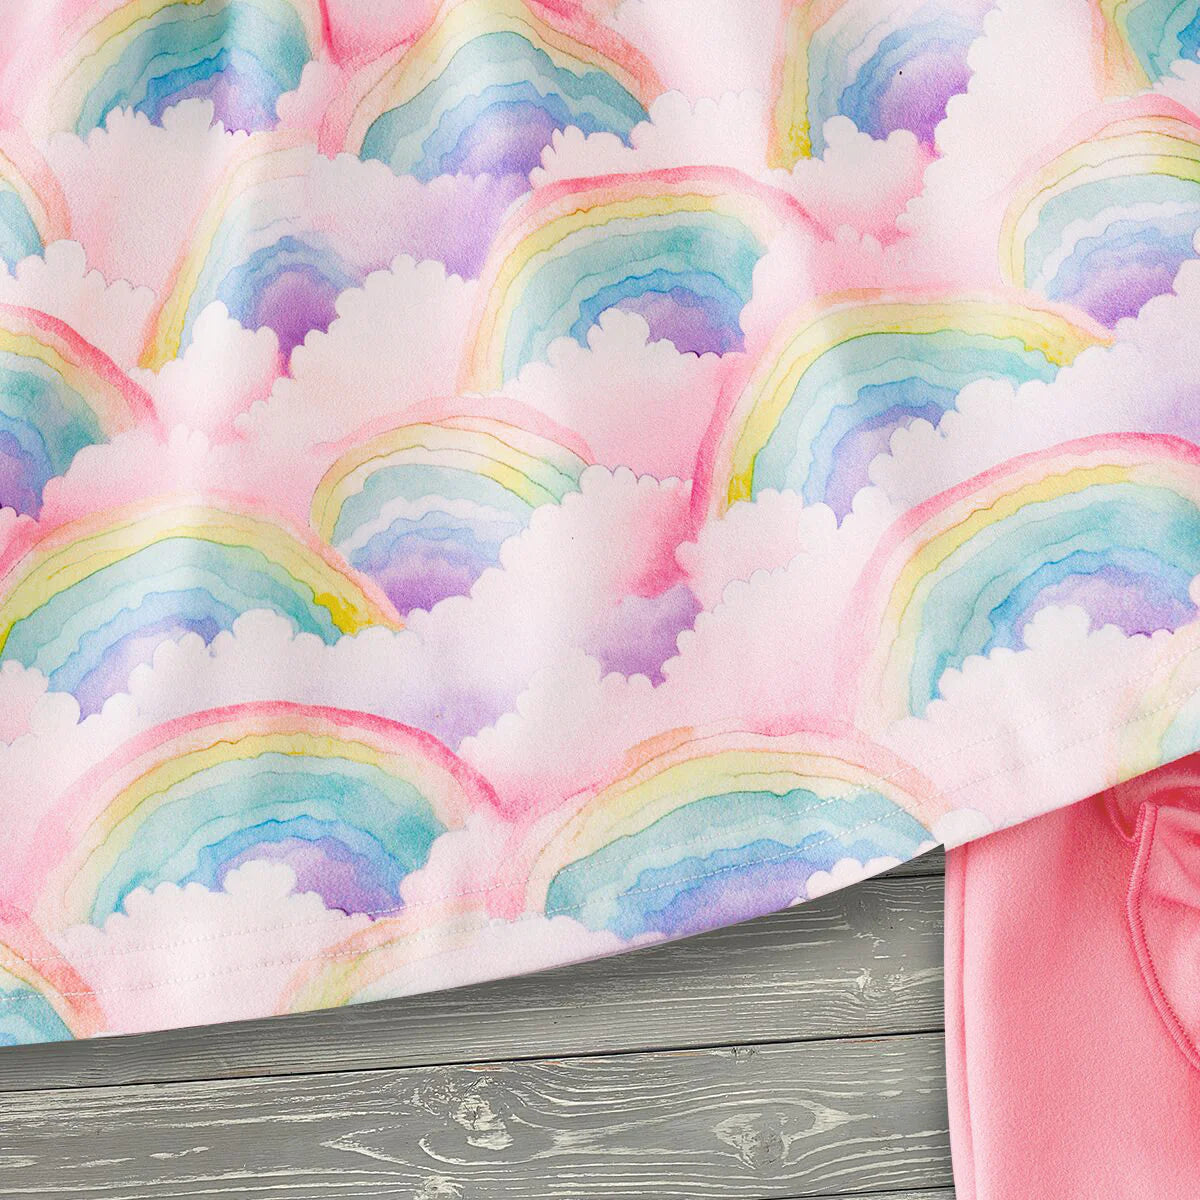 Rainbow Dreamers Two Piece Shorts Set